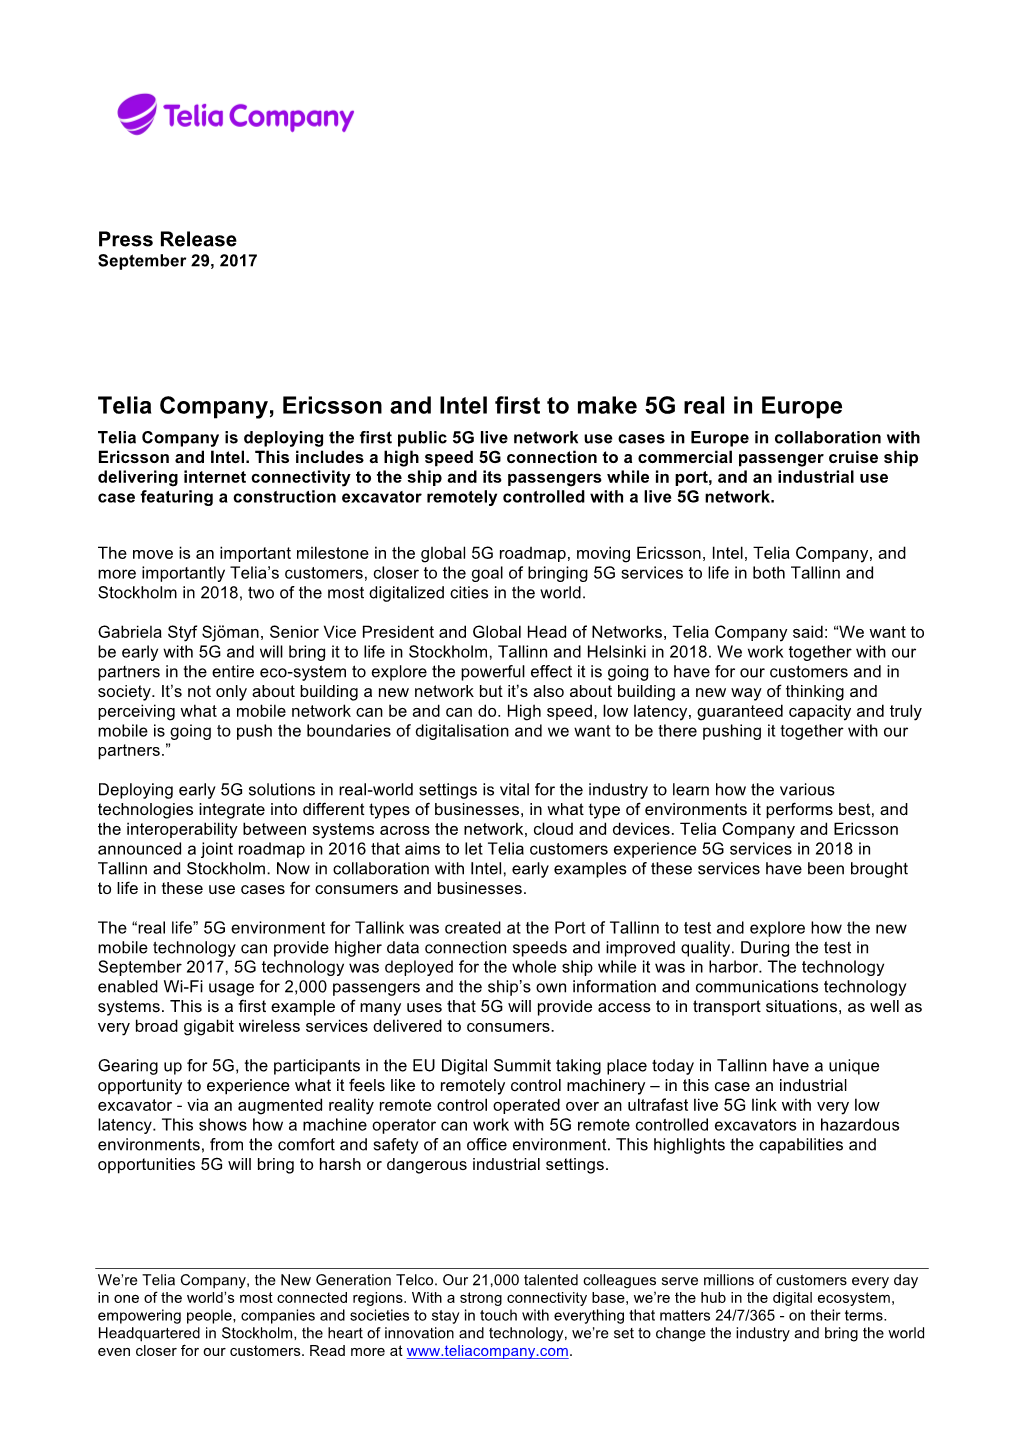 Telia Company, Ericsson and Intel First to Make 5G Real in Europe